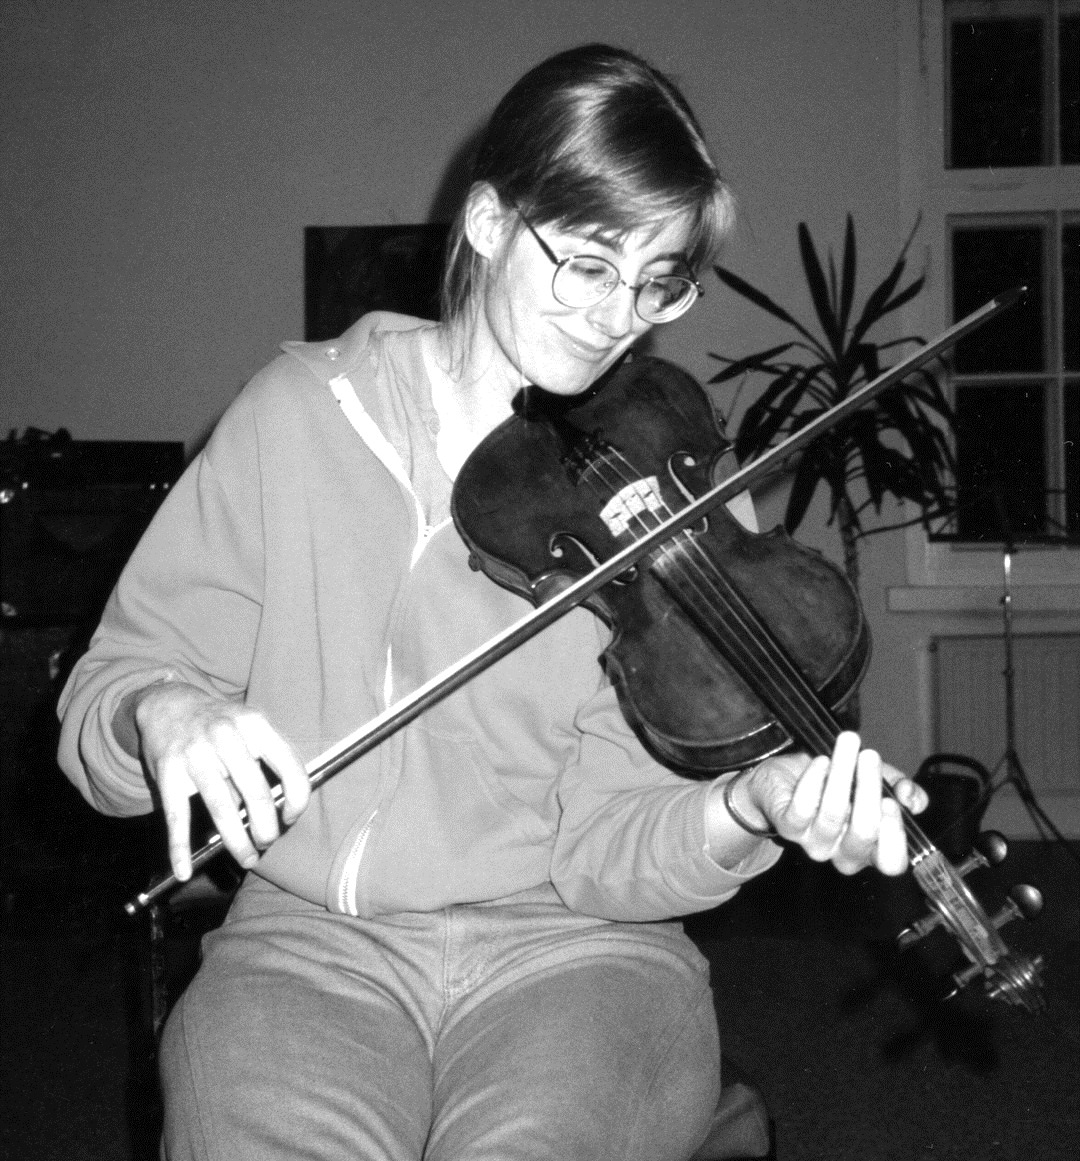 Heidelberger playing the fiddle in Germany during her days as a postdoc.